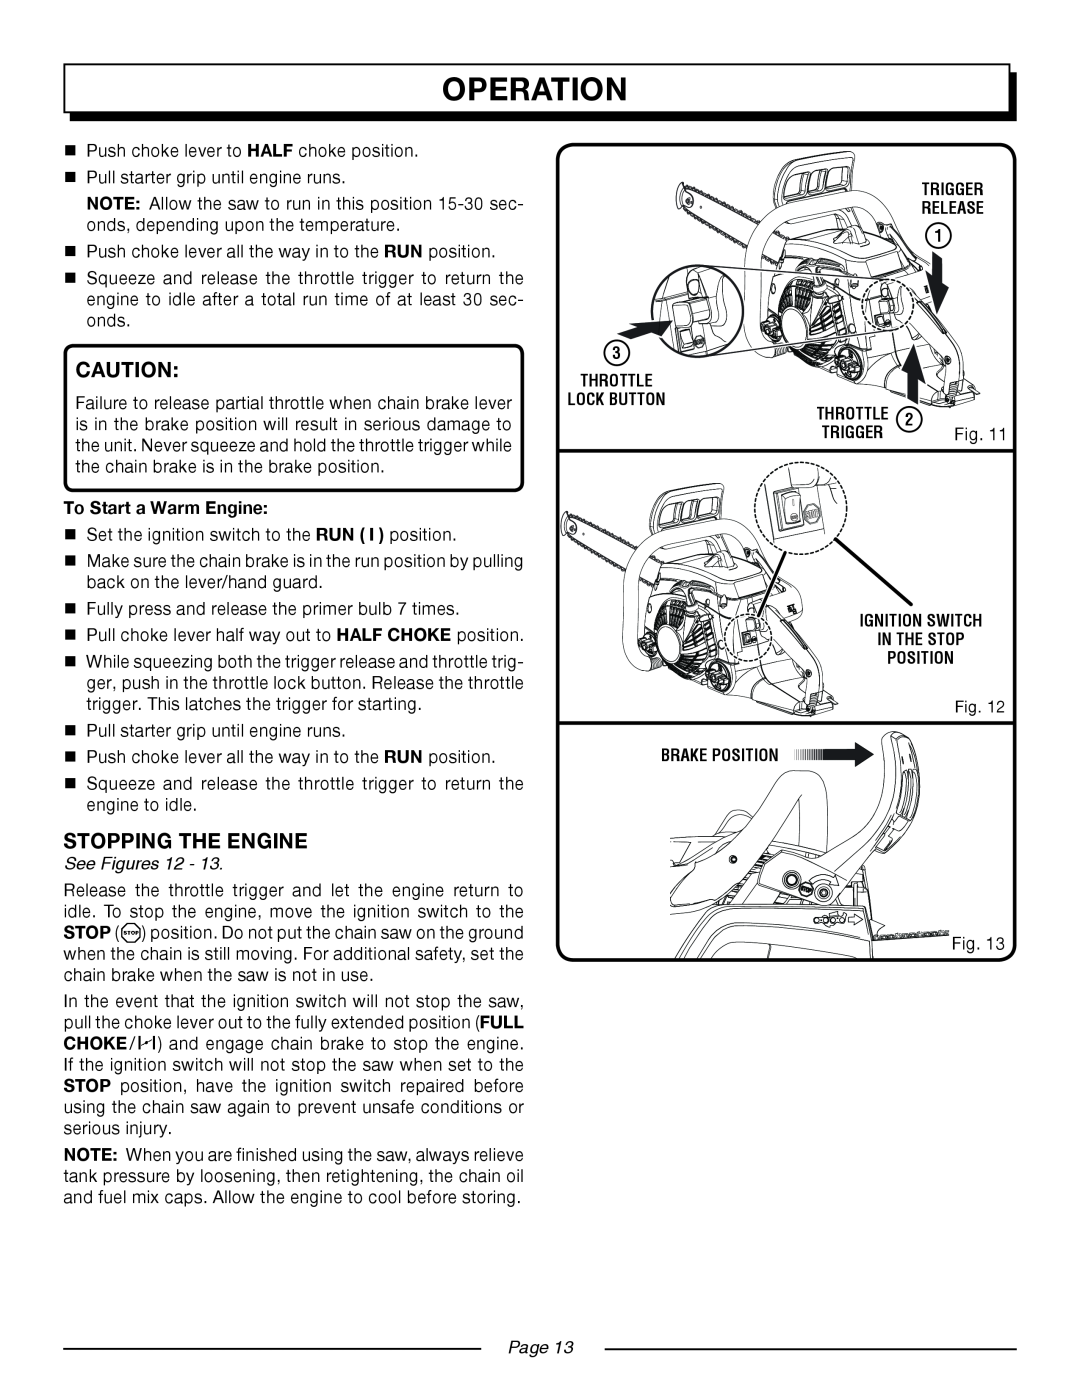 Homelite UT10552 manual operation, Stopping The Engine, See Figures 12, Page 